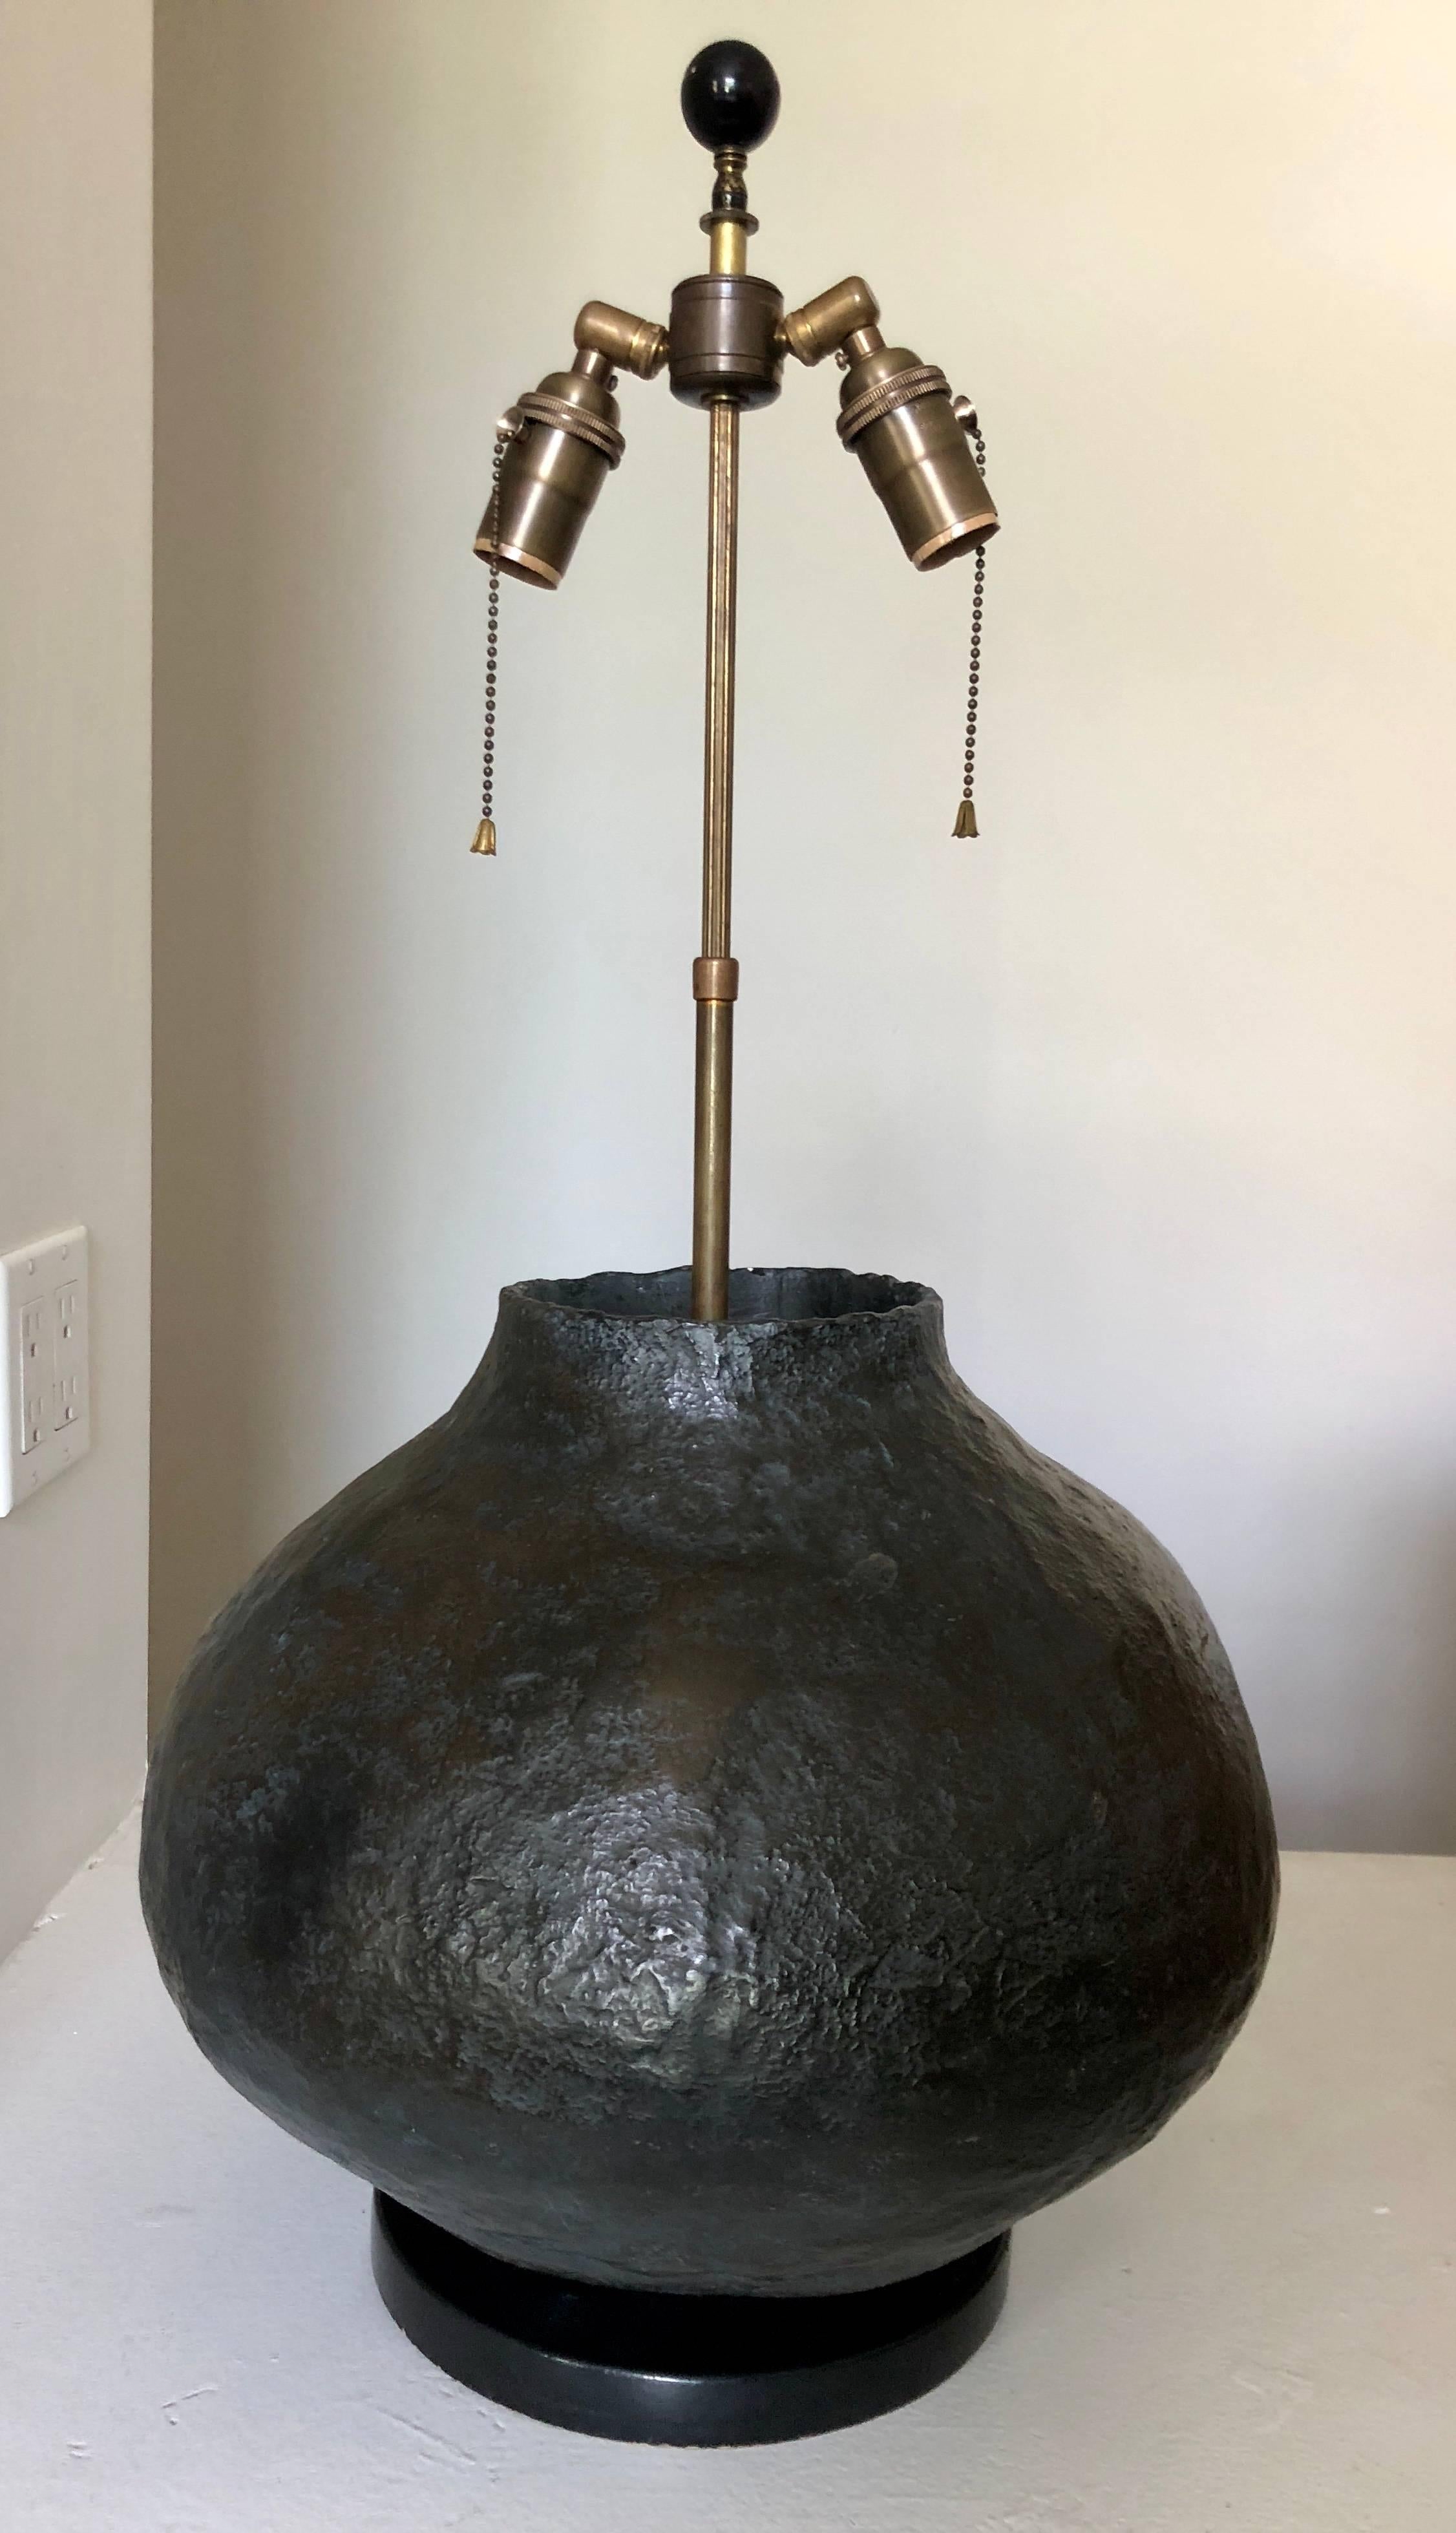 Interesting midcentury hand-thrown pottery lamp with textured surface and dark semi-mat glaze. Measures: Pottery is 14” high.